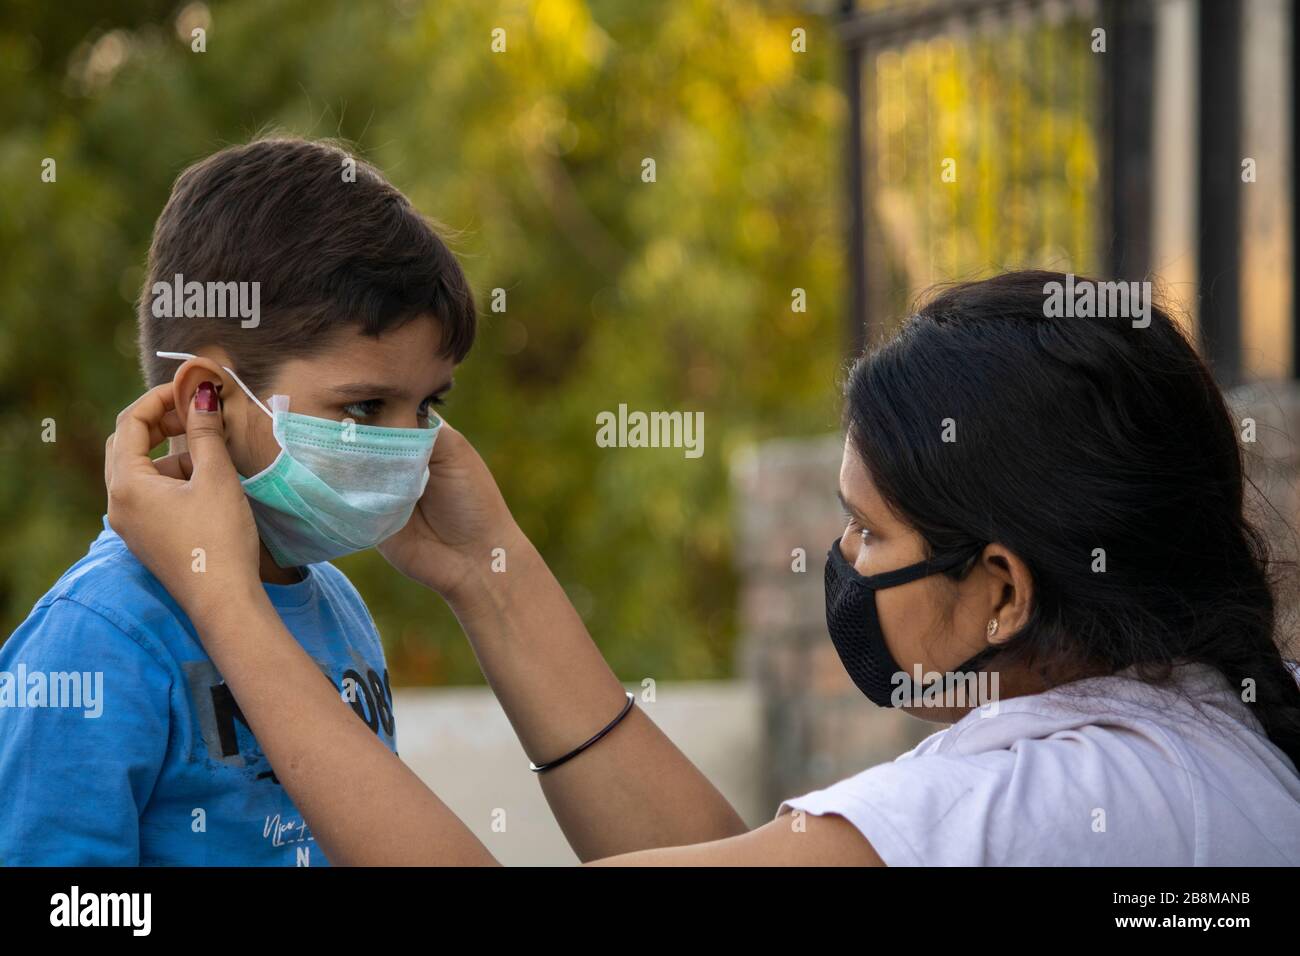 Indian child coughing on his elbow showing tips to protecting corona virus Stock Photo